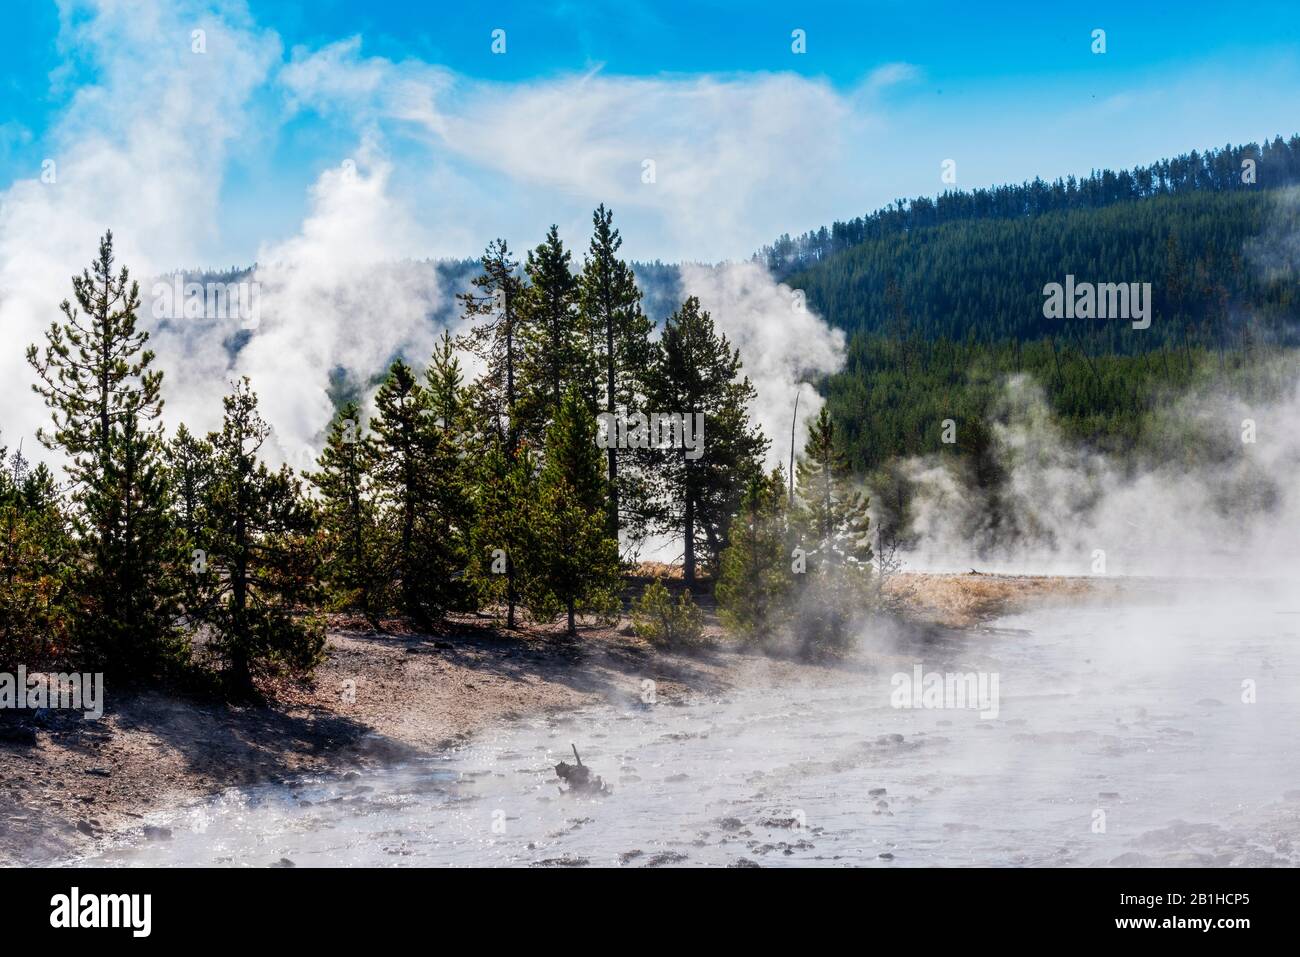 Boiling hot spring with steam rising up off water, heya day forest beyond under blue sky. Green forest covered hillsides. Stock Photo